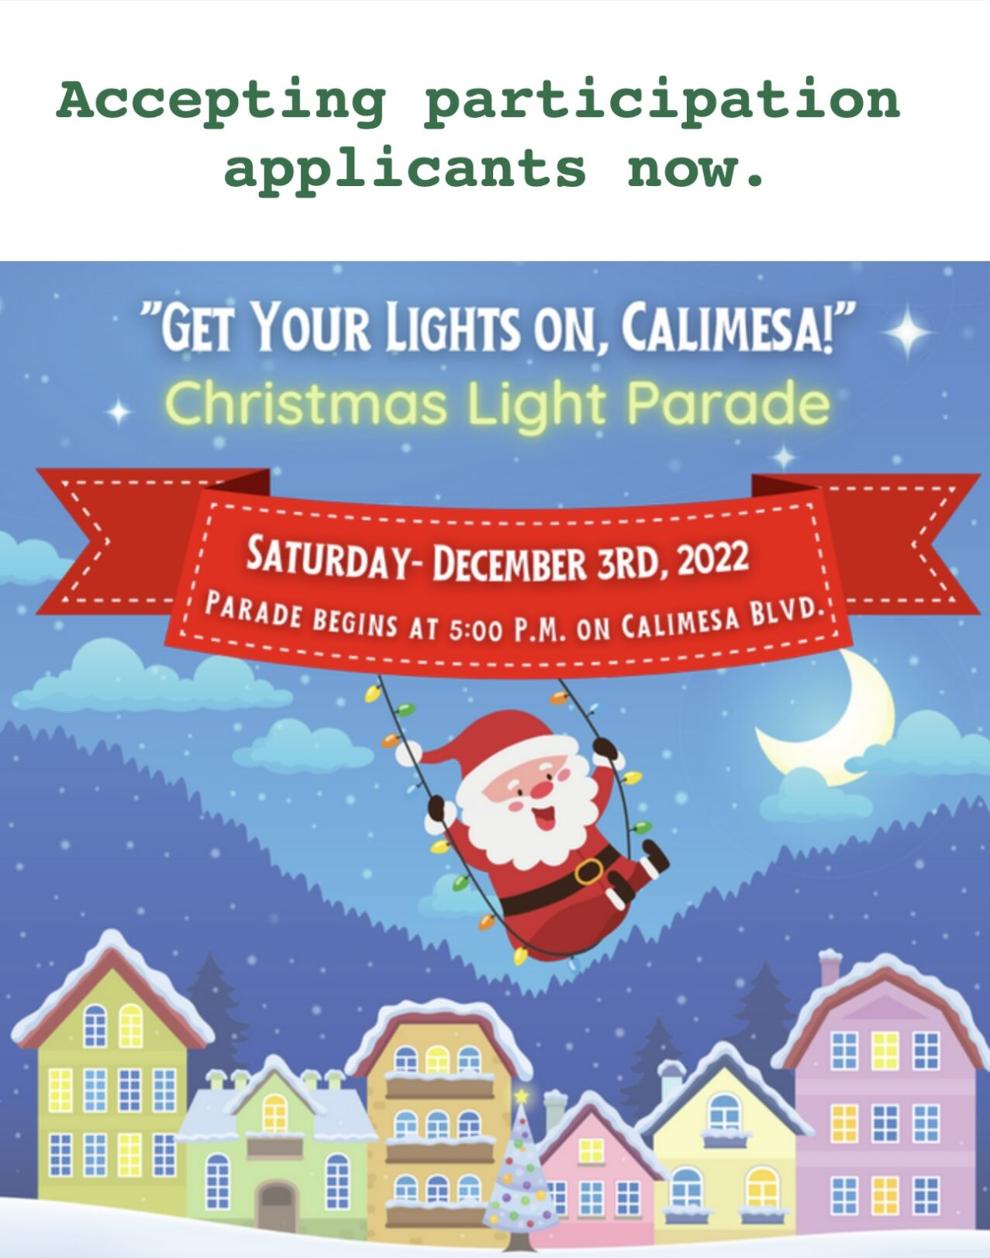 Get Your Lights on, Calimesa Christmas Light Parade Announcements